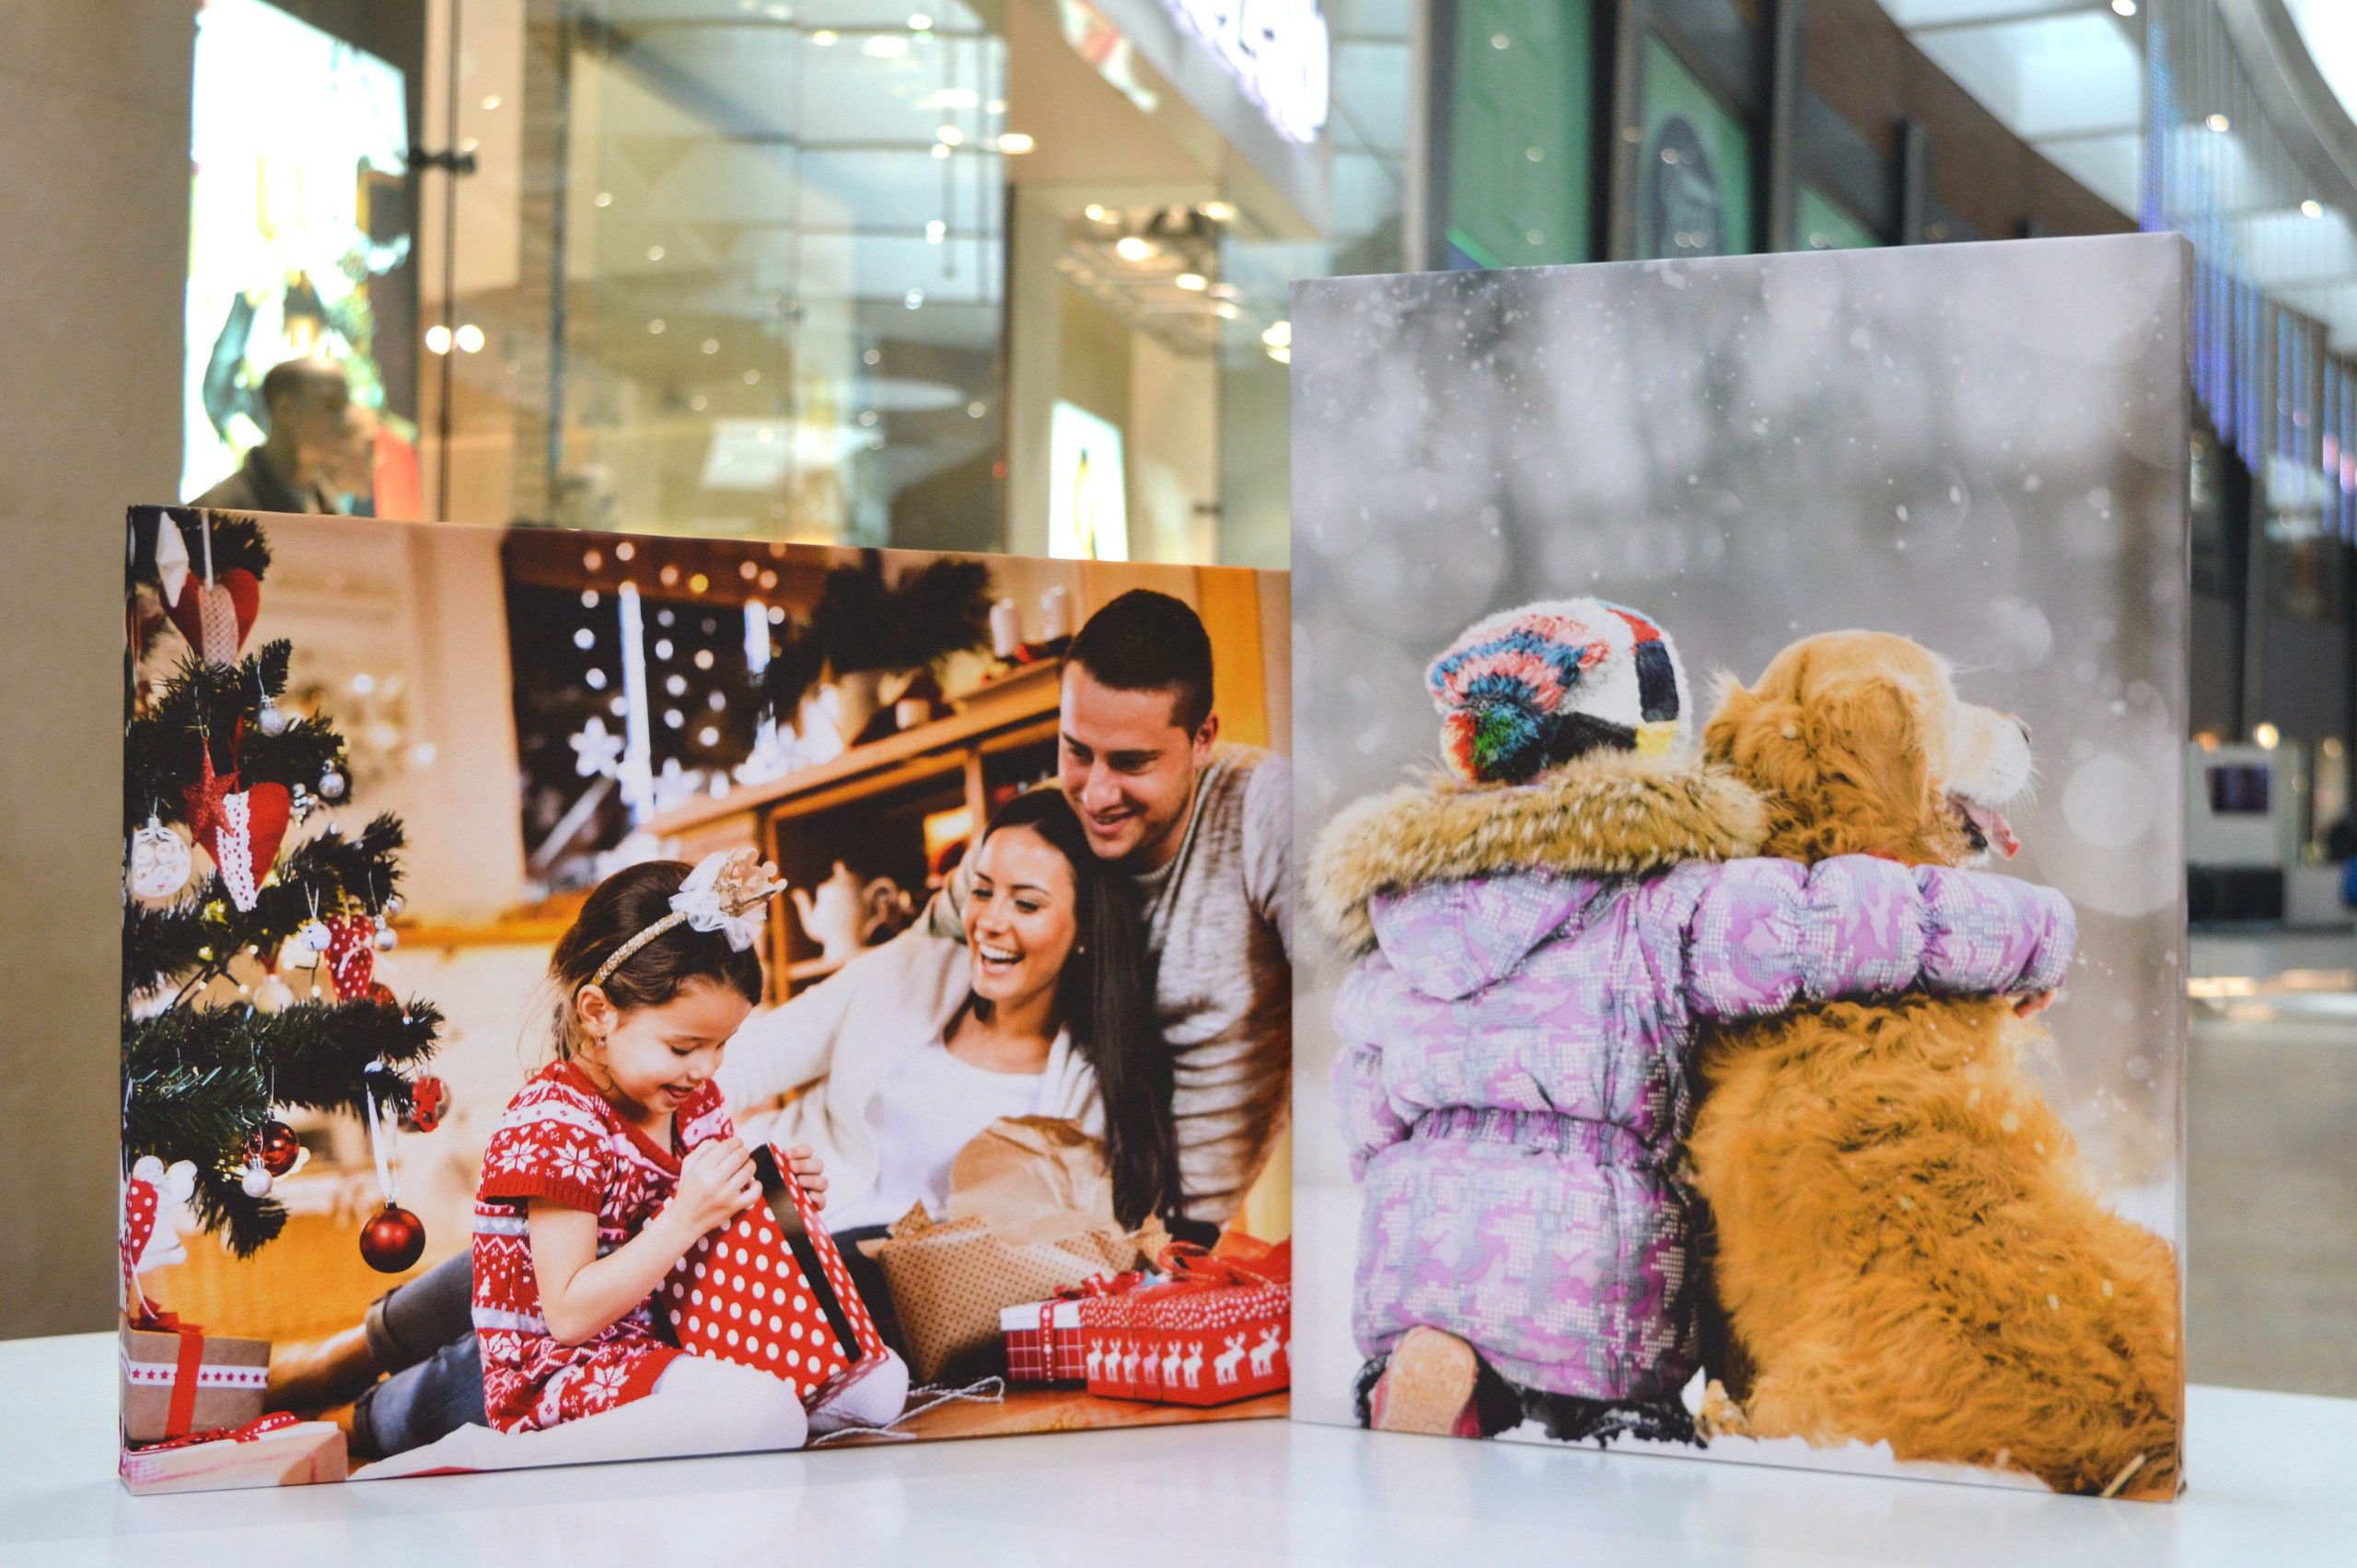 Buy one canvas, get another for £1 | Silverburn Shopping Centre